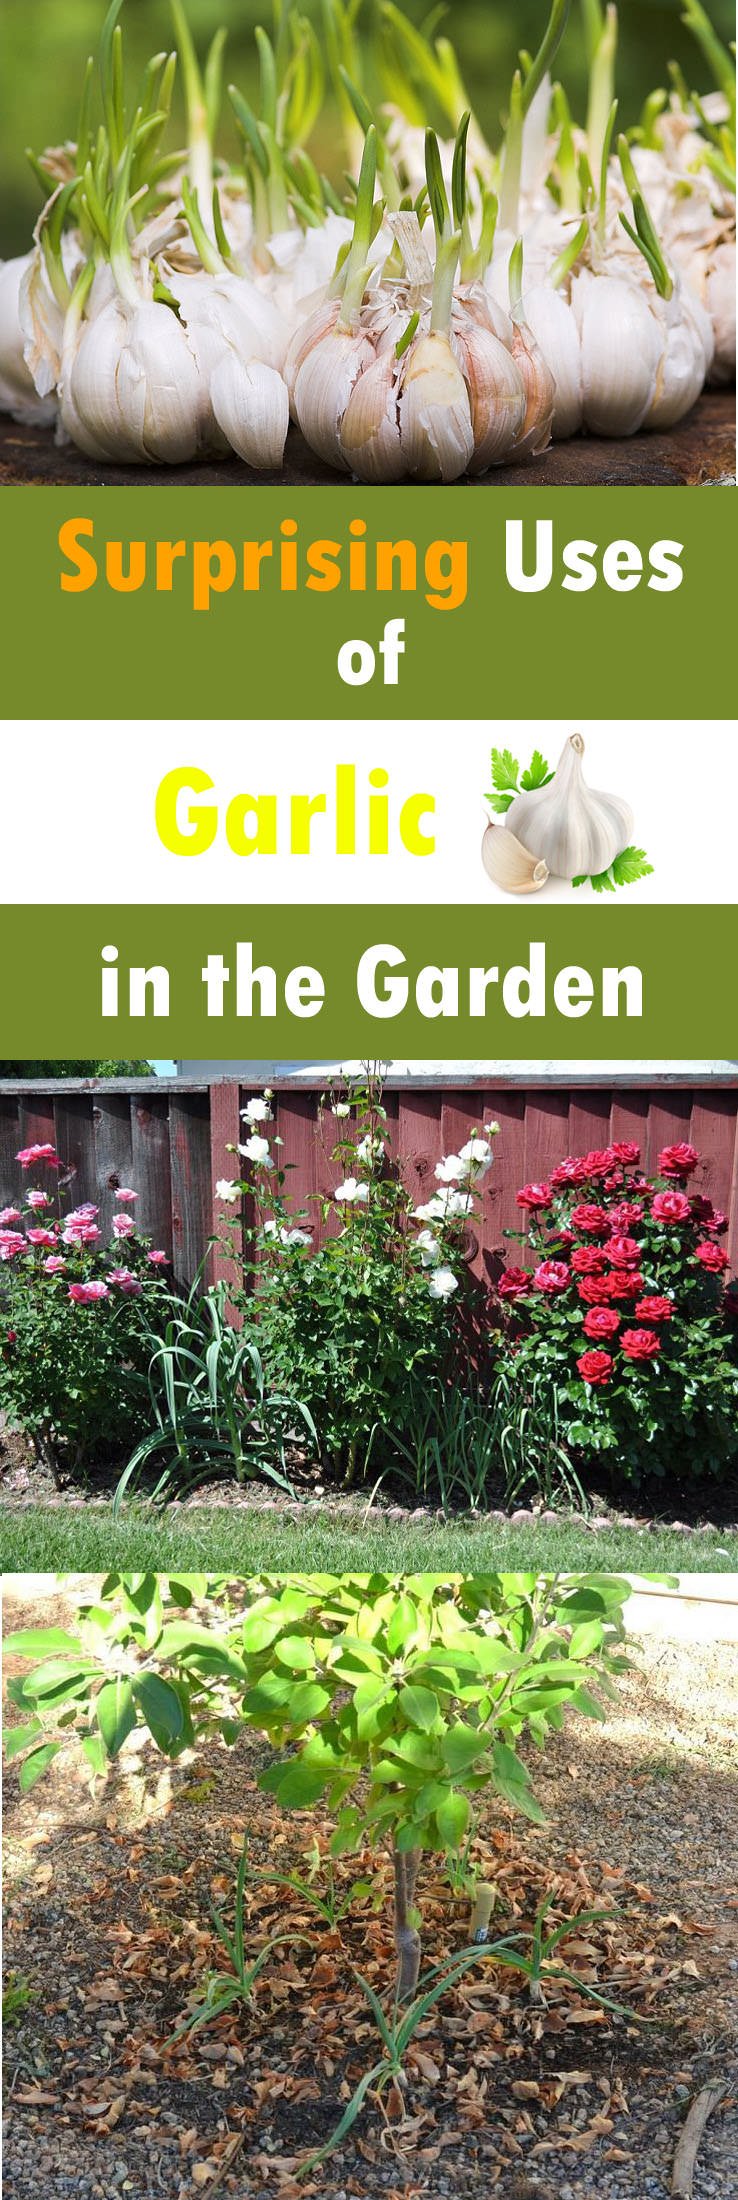 Using garlic in the garden is a great way to save yourself from using harmful chemical pesticides and fungicides as garlic has antibacterial, fungicidal and insecticidal properties.